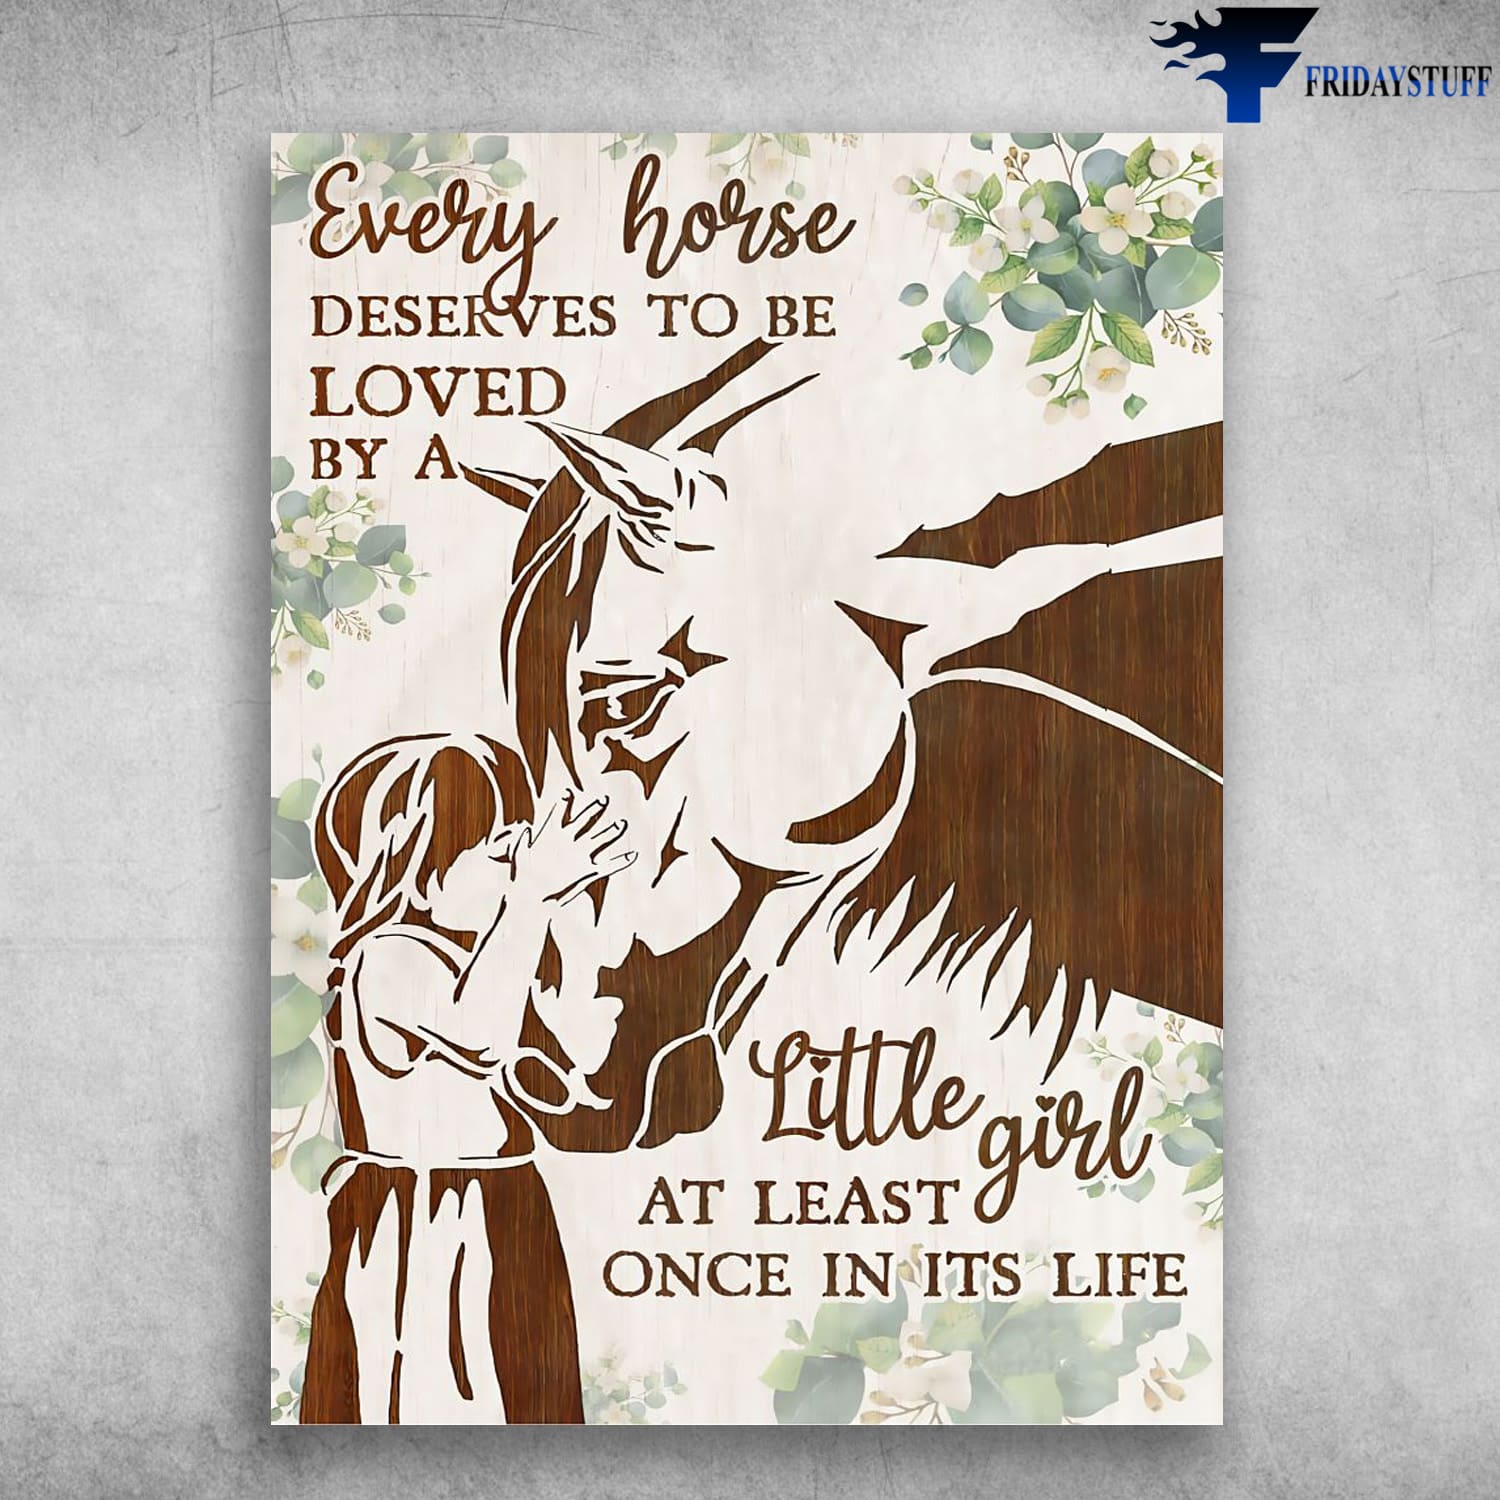 Little Girl And Horse, Horse Lover, Every Horse Deserves To Be Loved, By A Little Girl At Least Once In Its Life